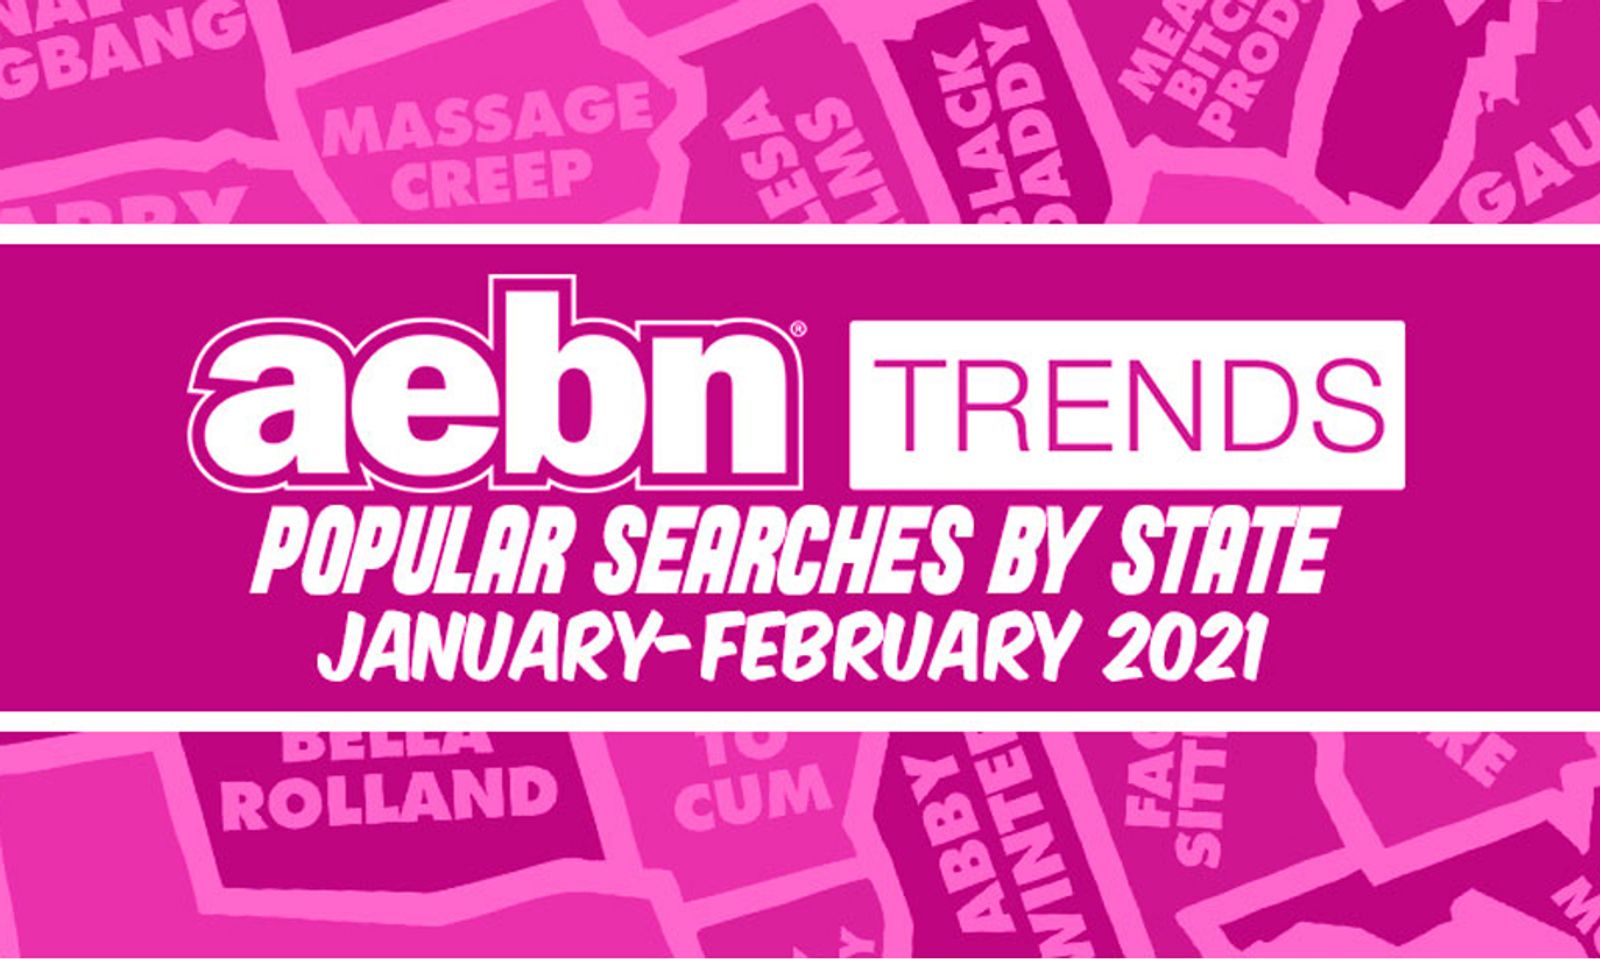 AEBN Trends Announces Popular January and February Search Info